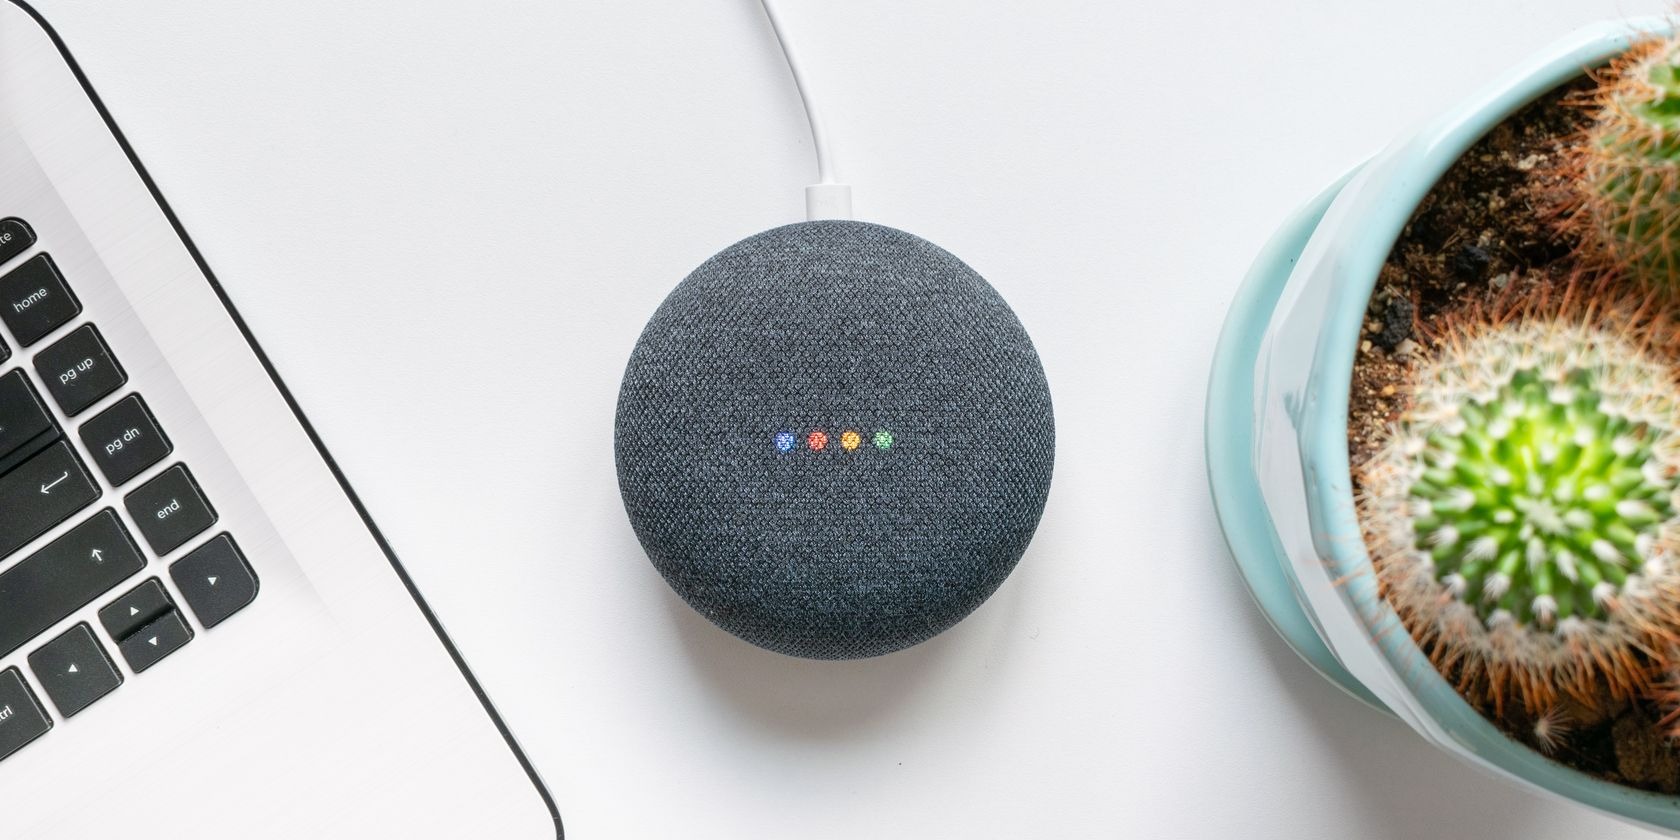 How To Connect Google Home To Mac